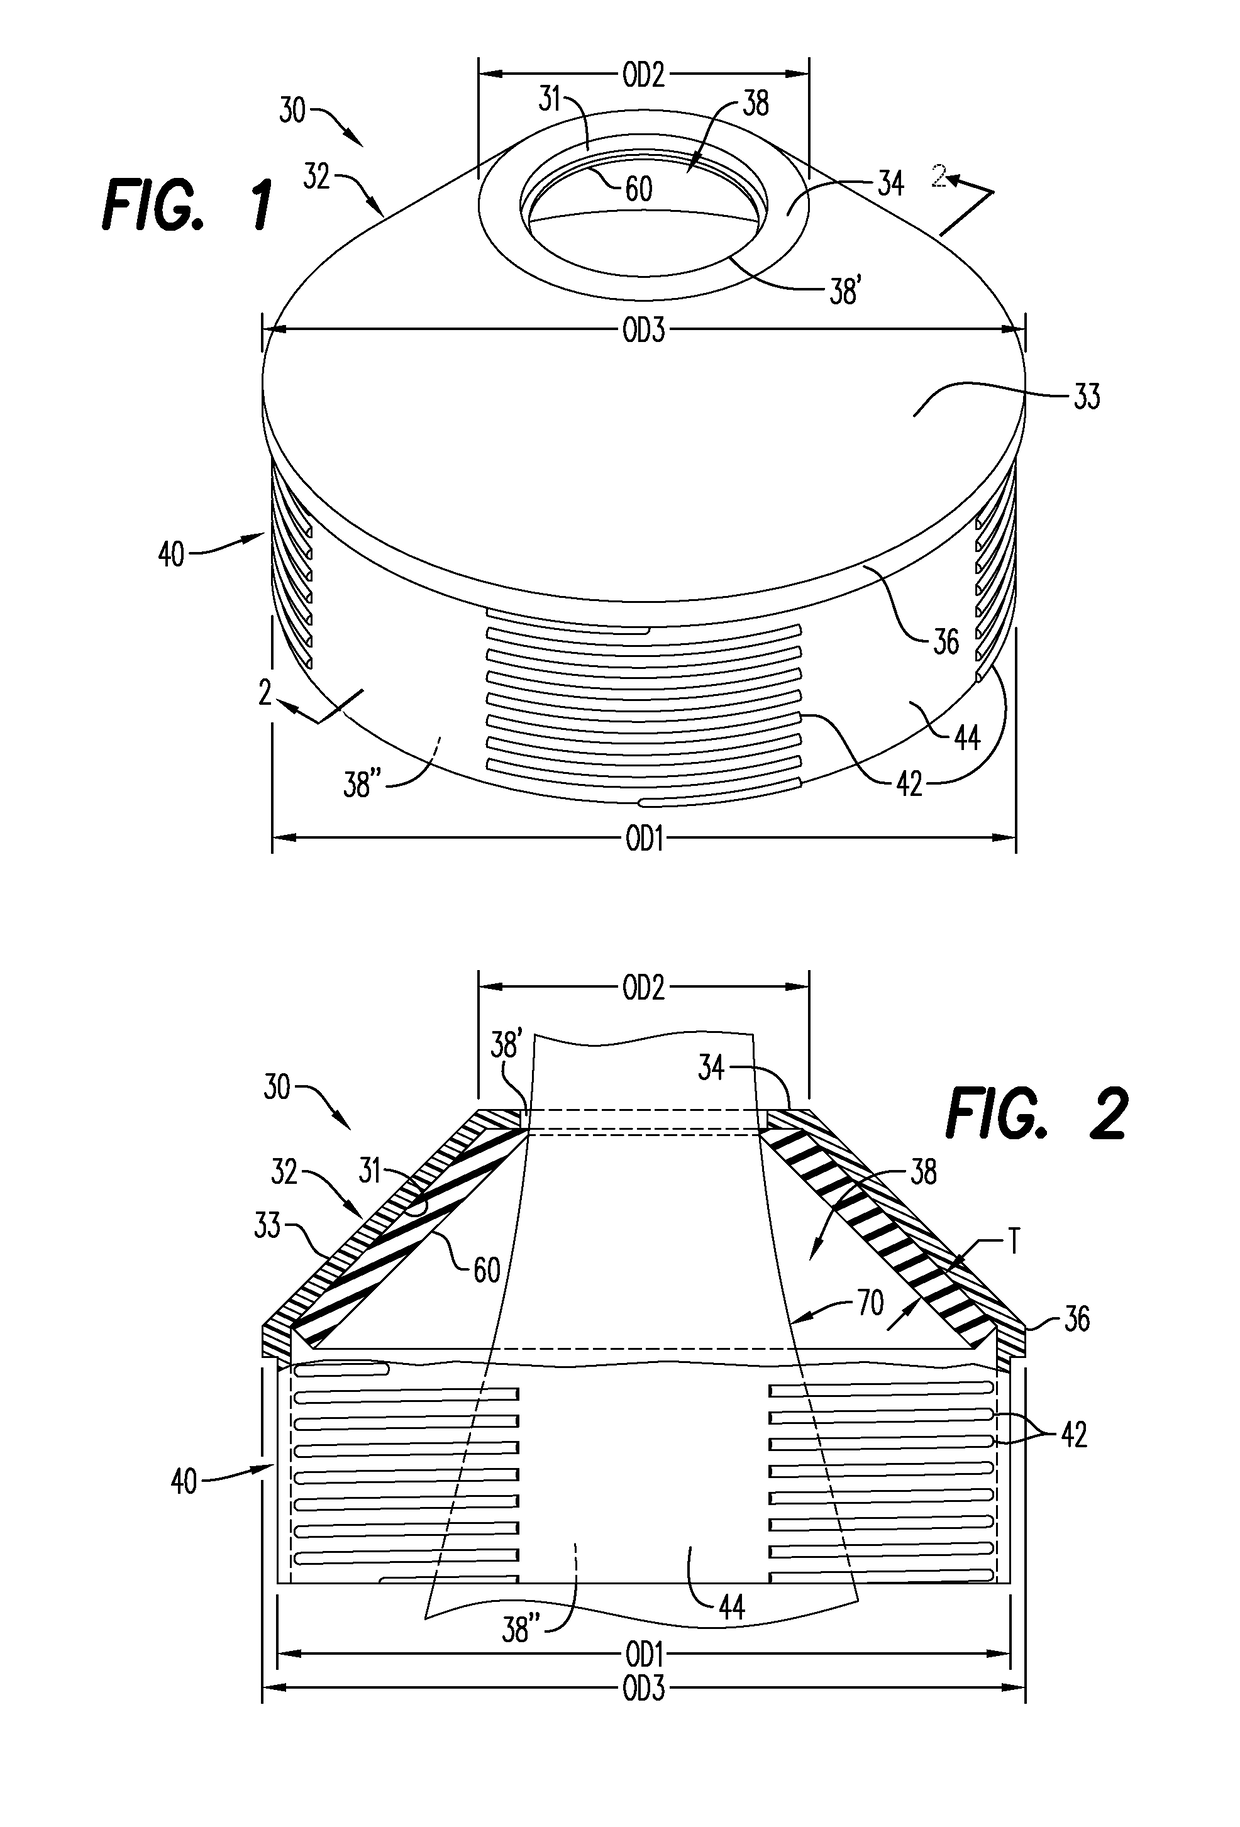 Retaining member and insulating vessel incorporating same